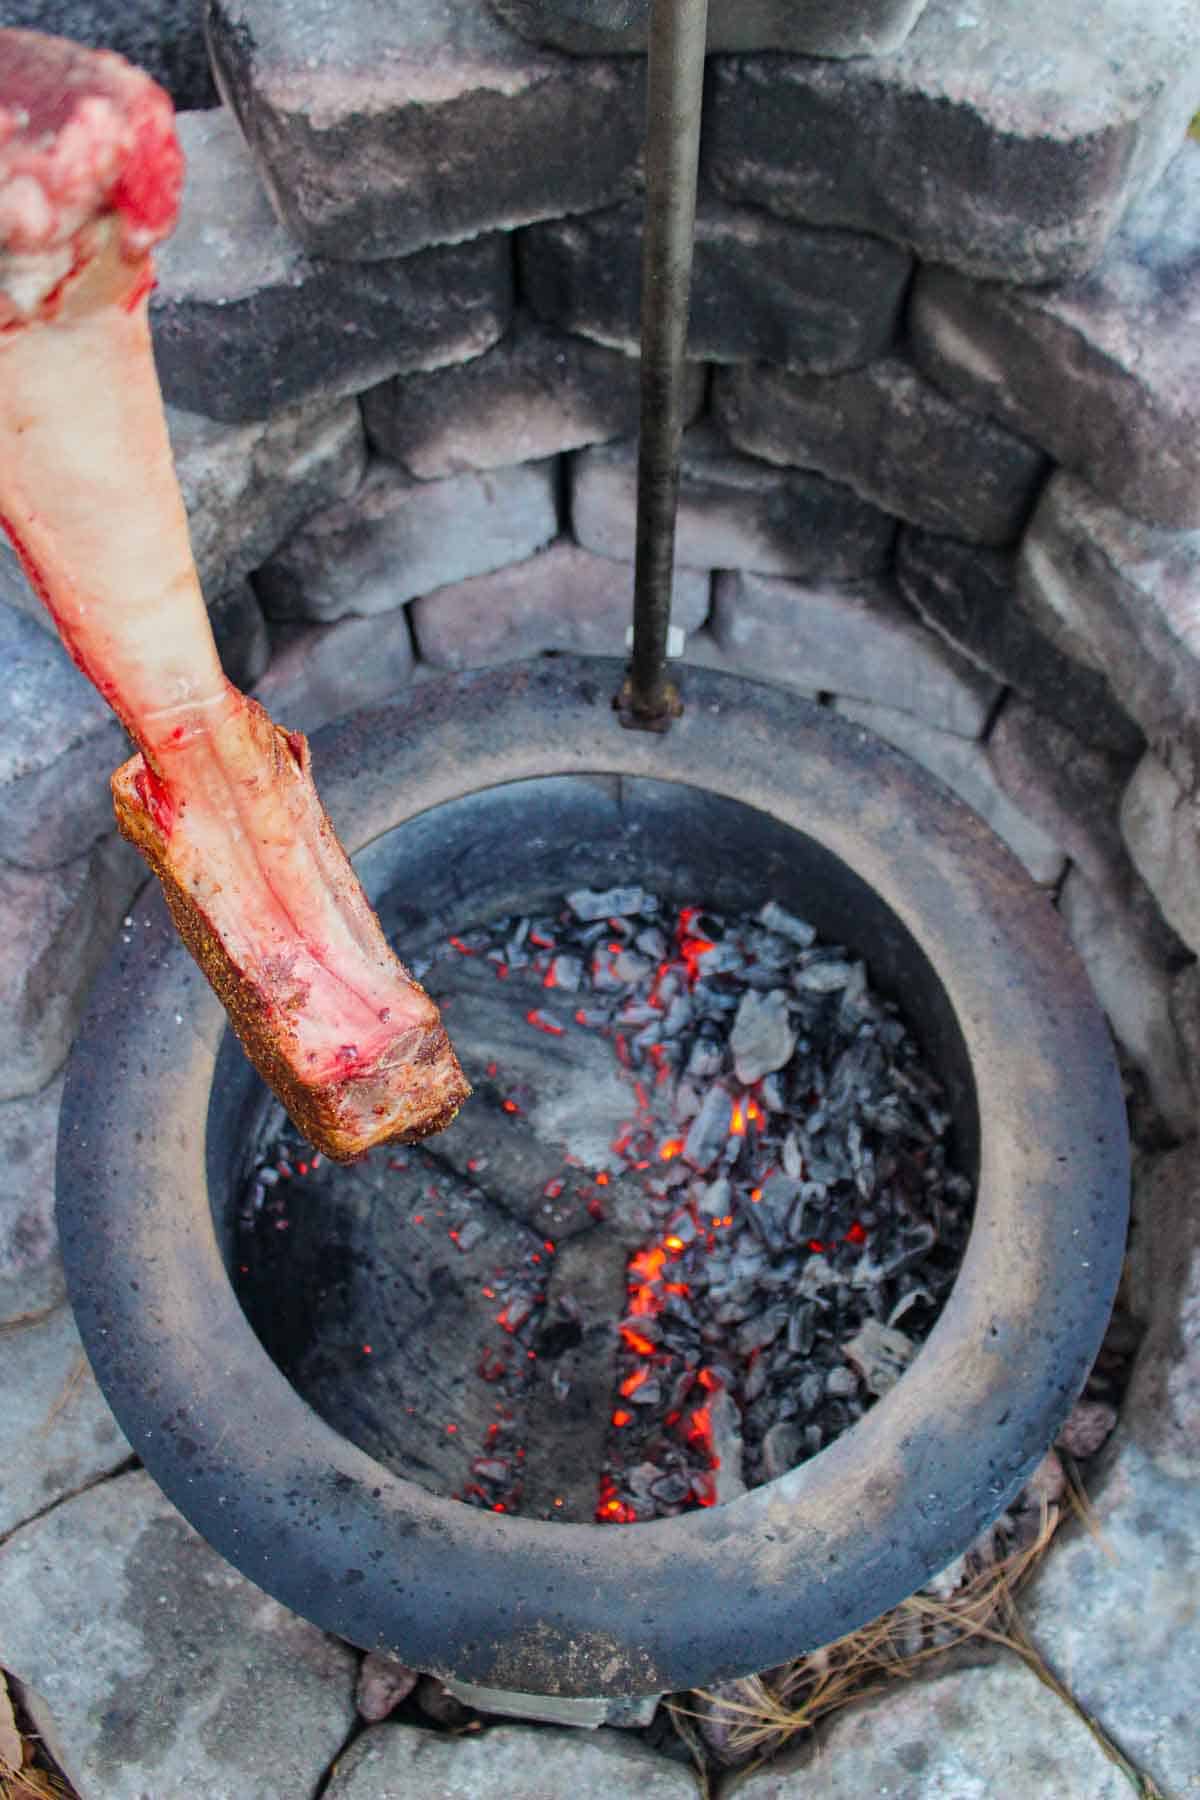 The tomahawk cooking indirectly by some burning embers.